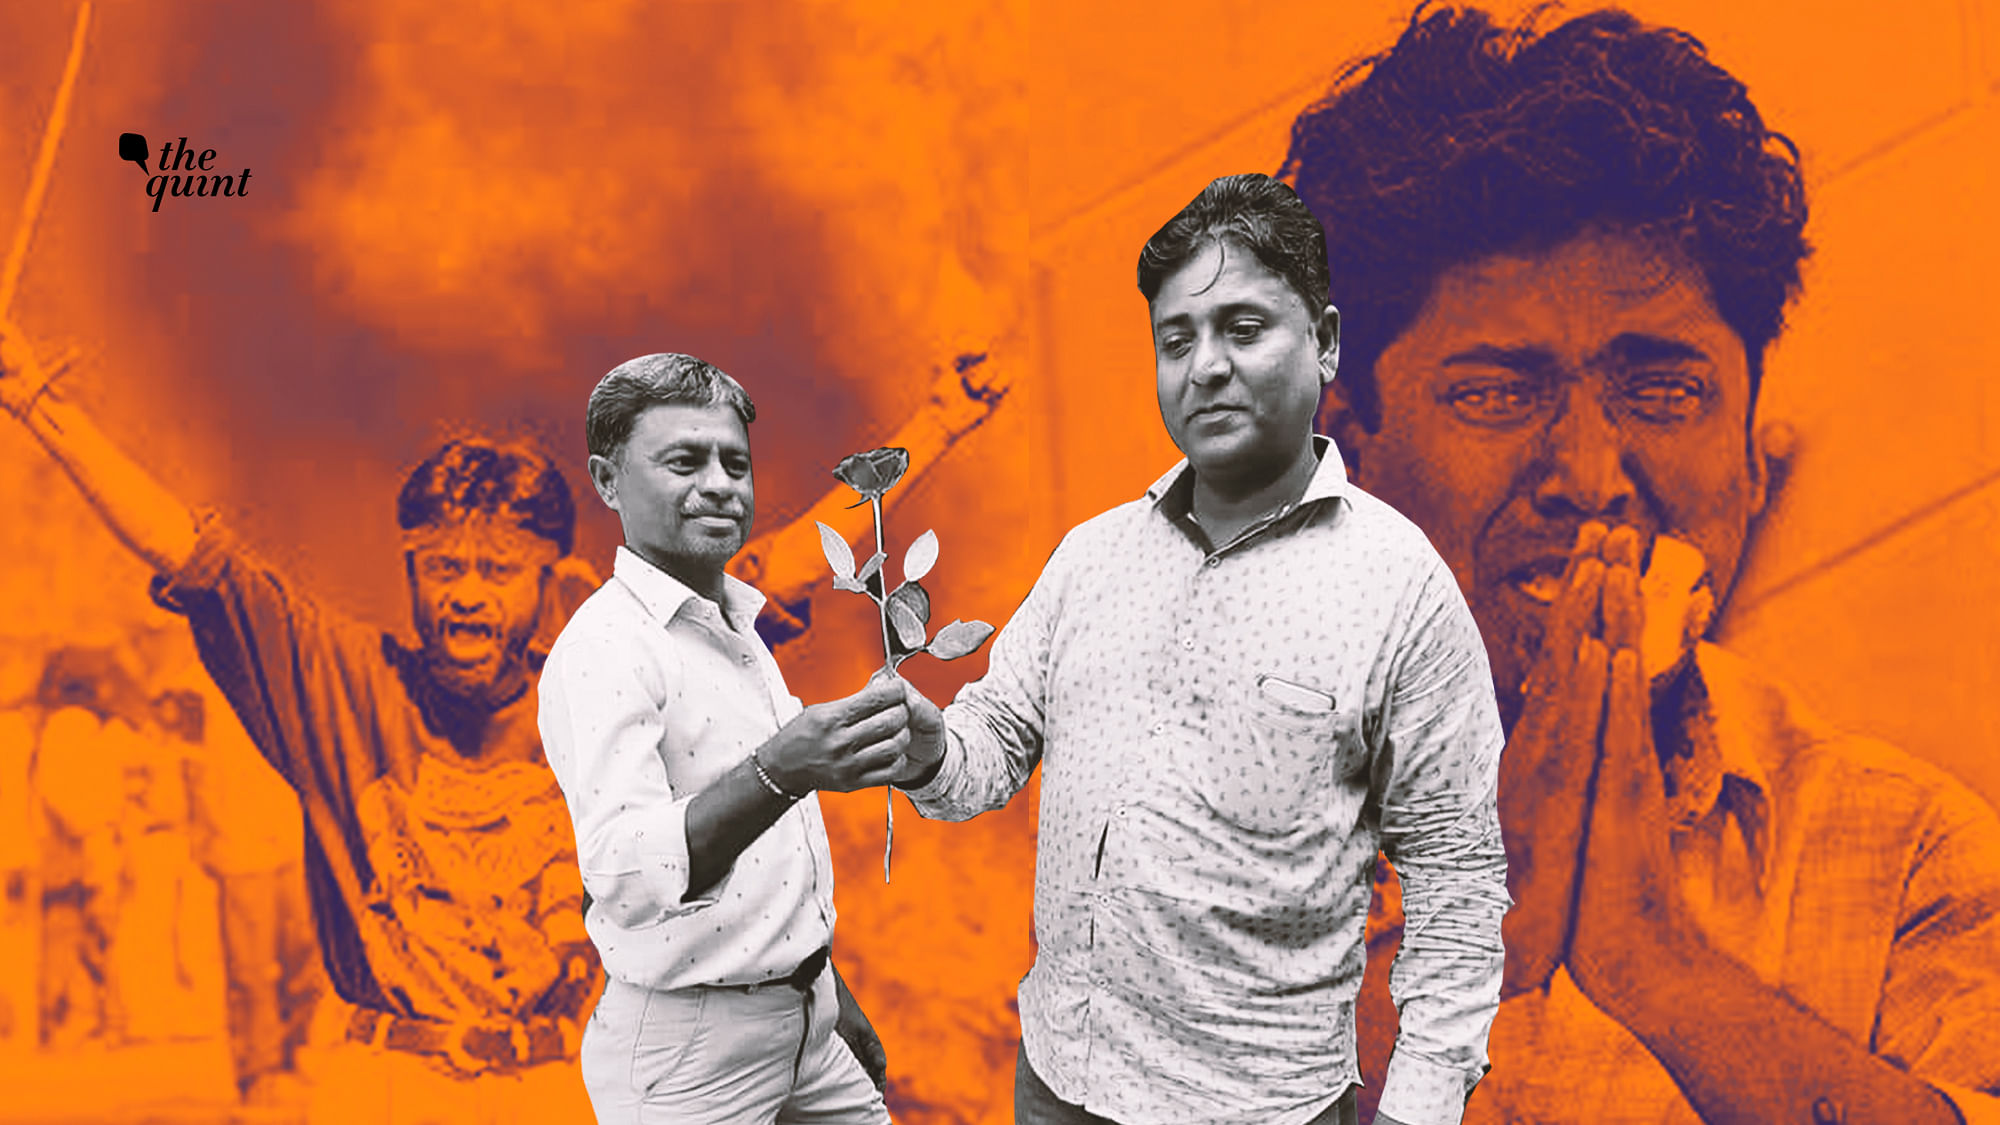 Qutubuddin Ansari (right) and Ashok Parmar (left) were the iconic (and infamous) faces of the Gujarat riots in 2002.